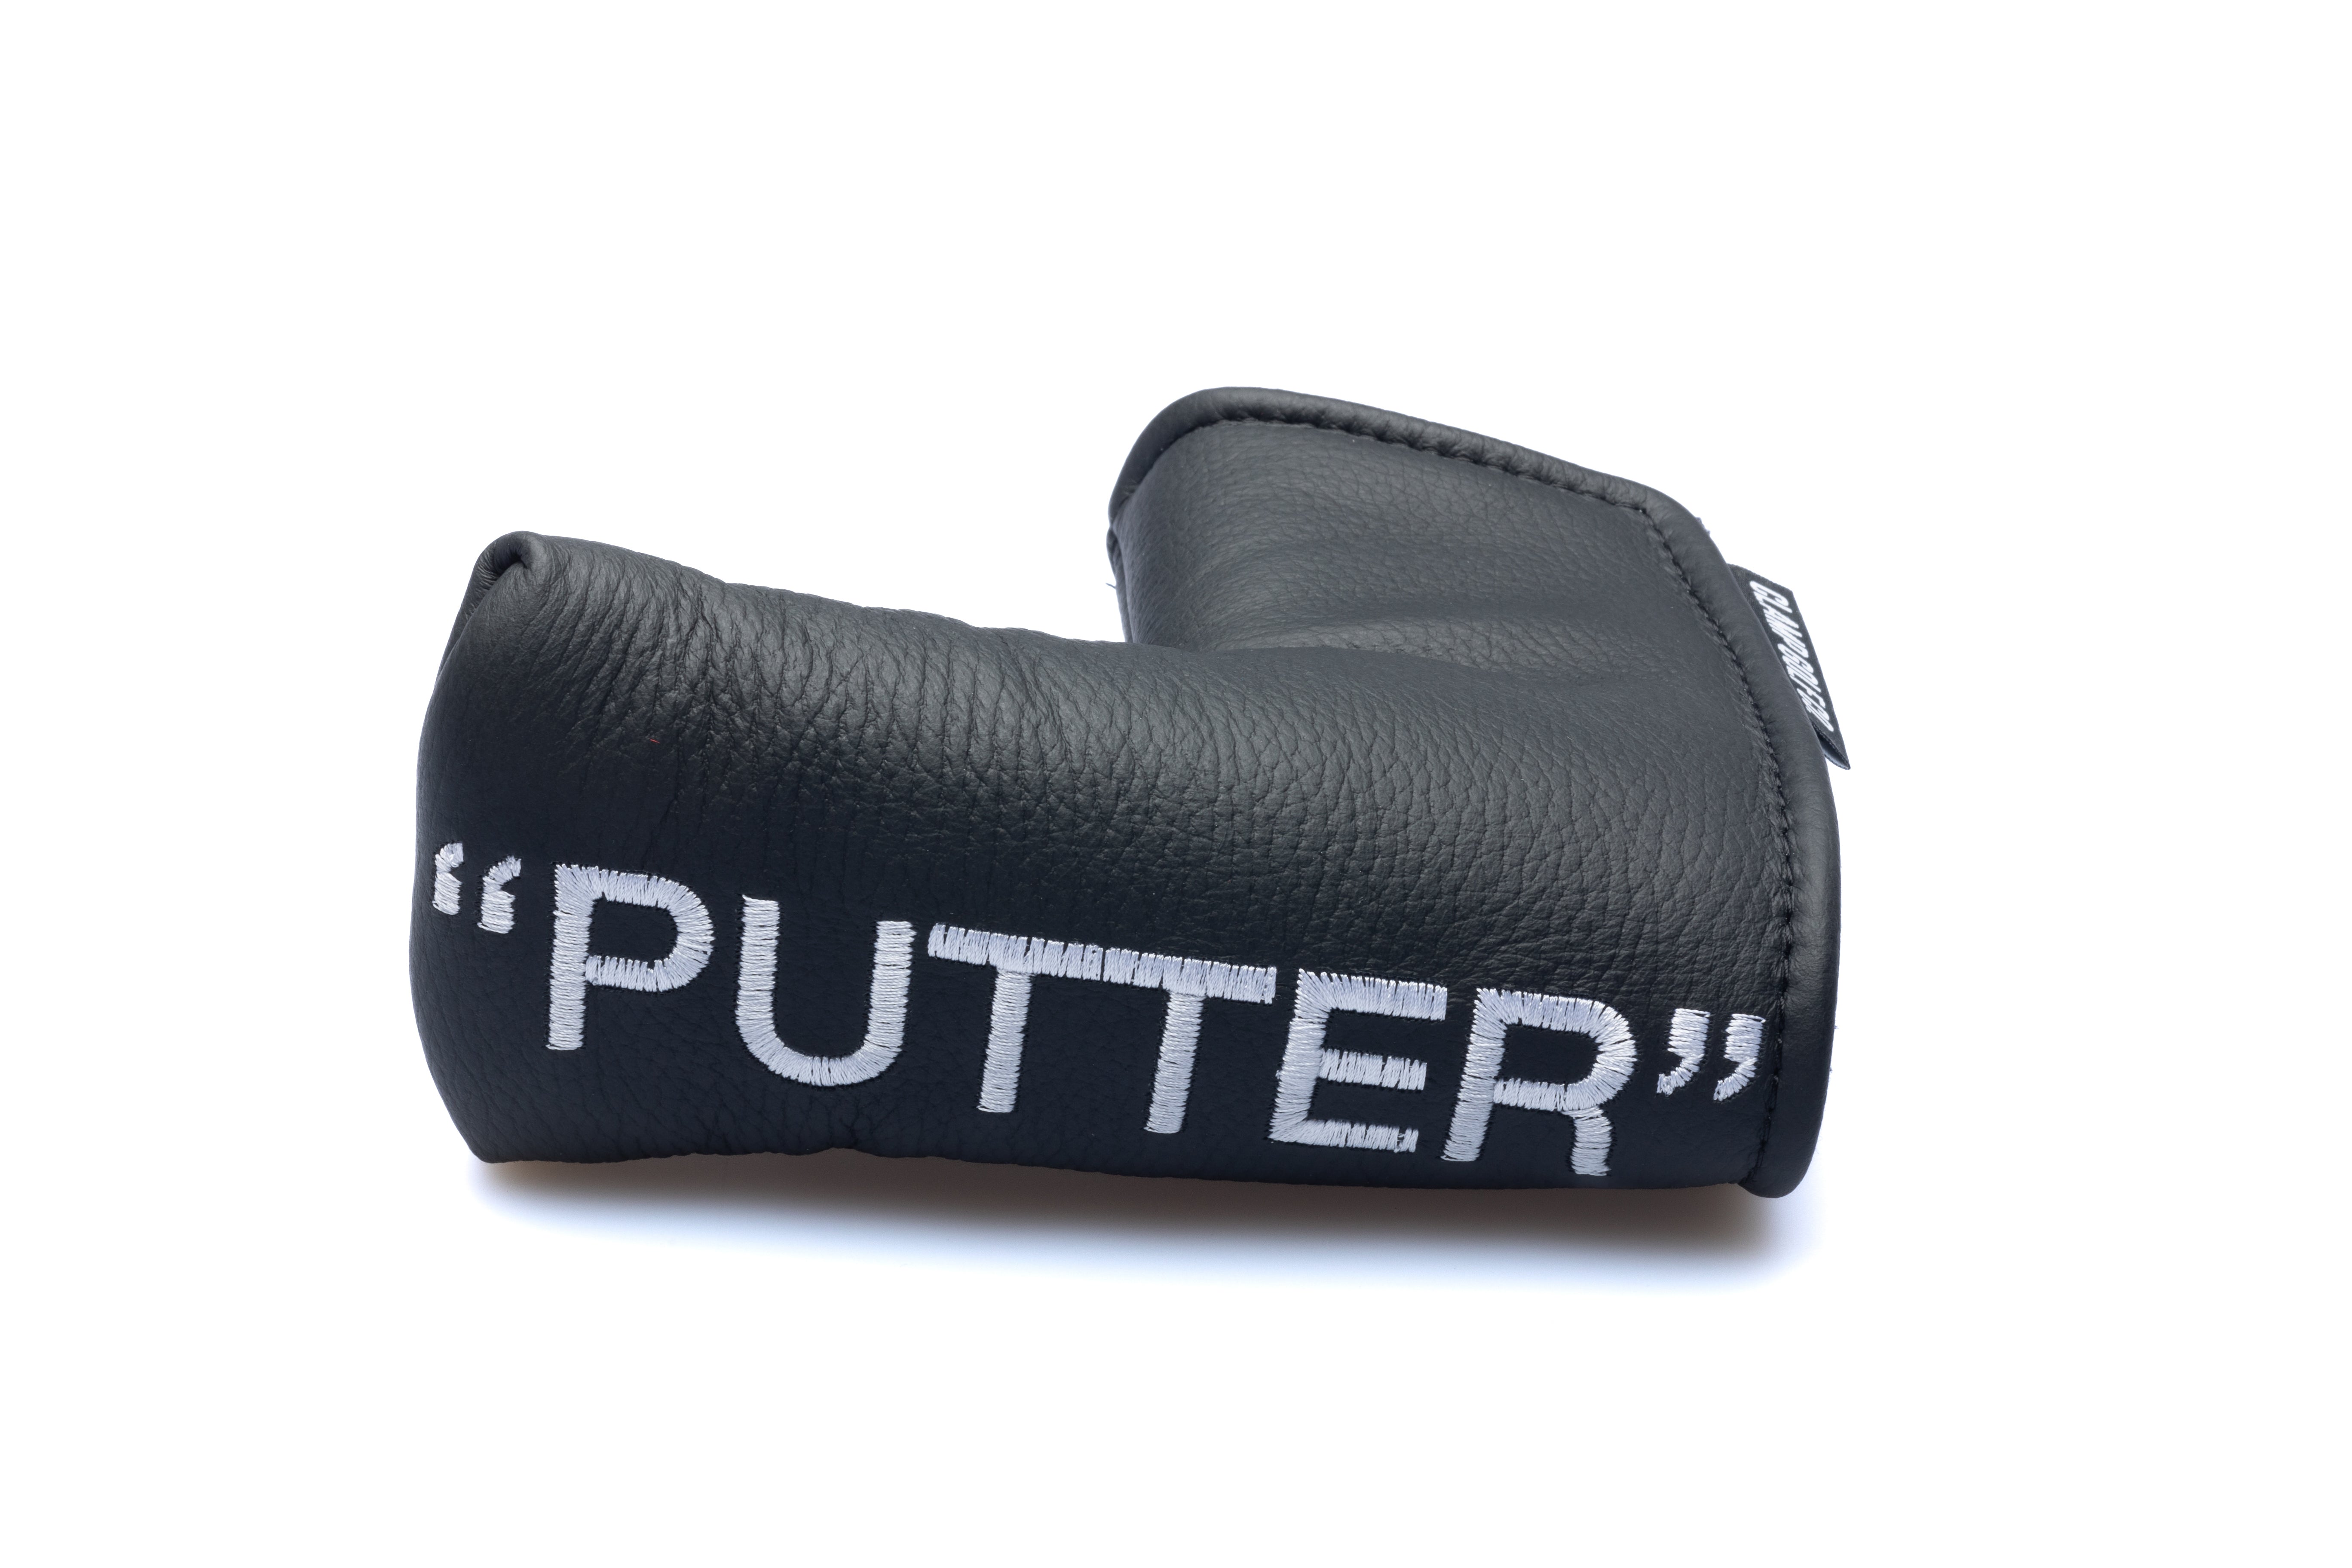 "Putter" Headcover